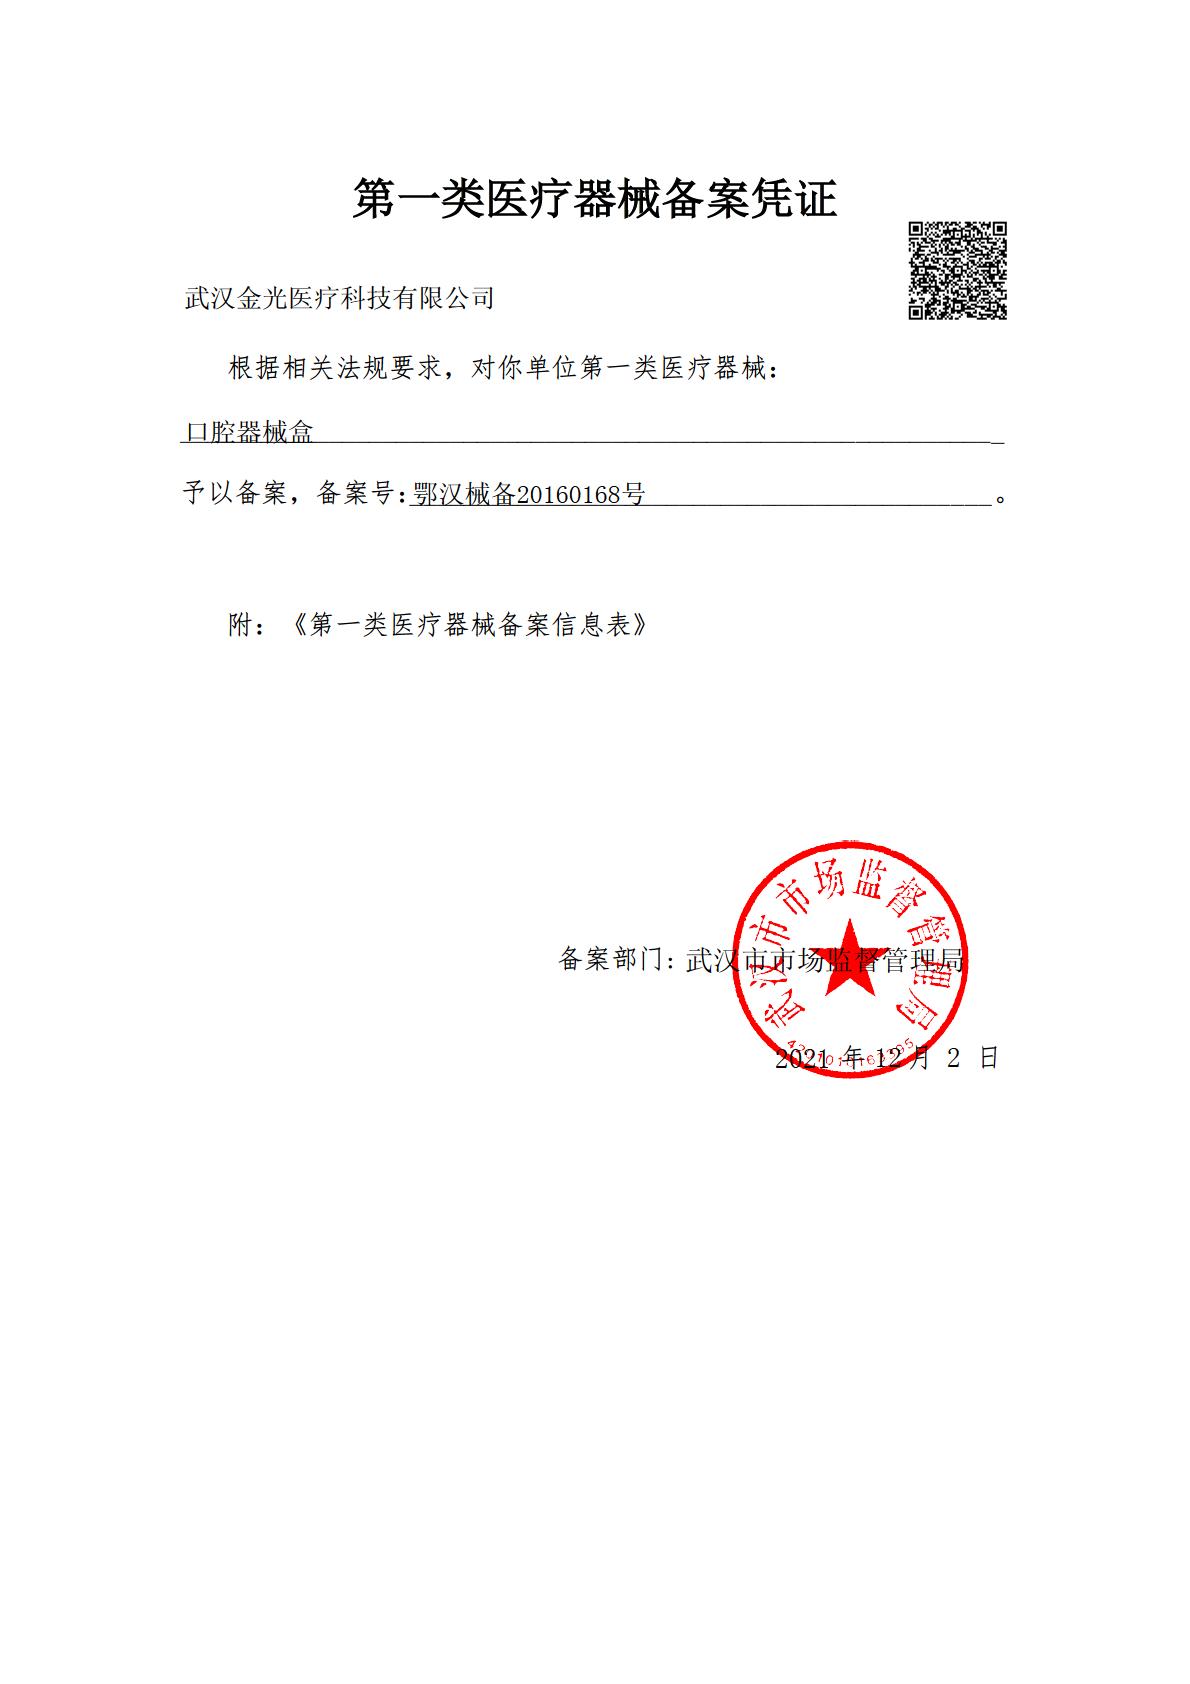 New filing certificate of oral instrument box